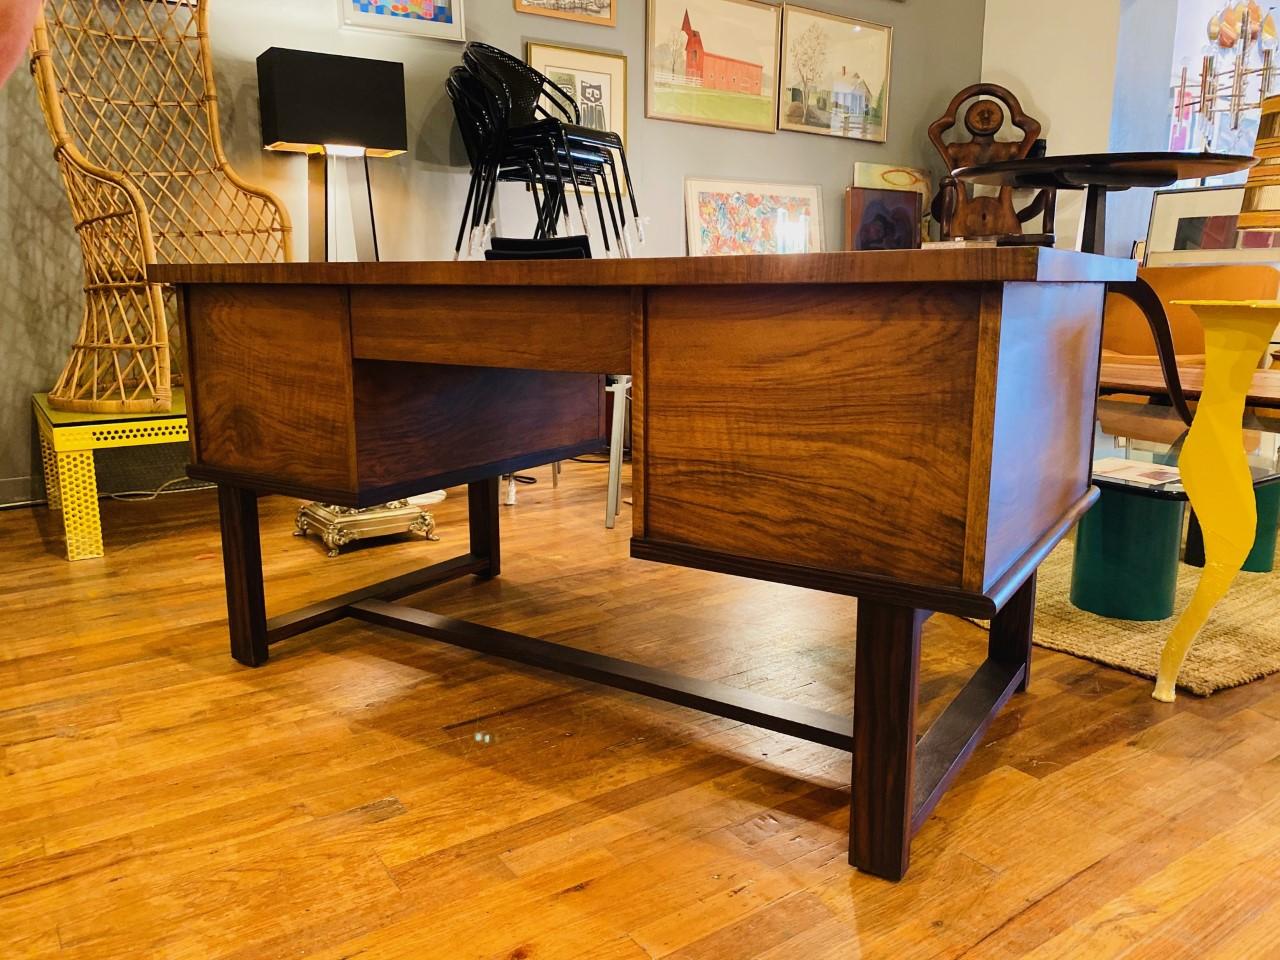 Beautiful mid century black walnut desk. This modernist desk is captivating and stylish. While sleek in lines, the desk has a strong grounding presence that defines its architectural lines. The fully finished drawers provide an incredible amount of